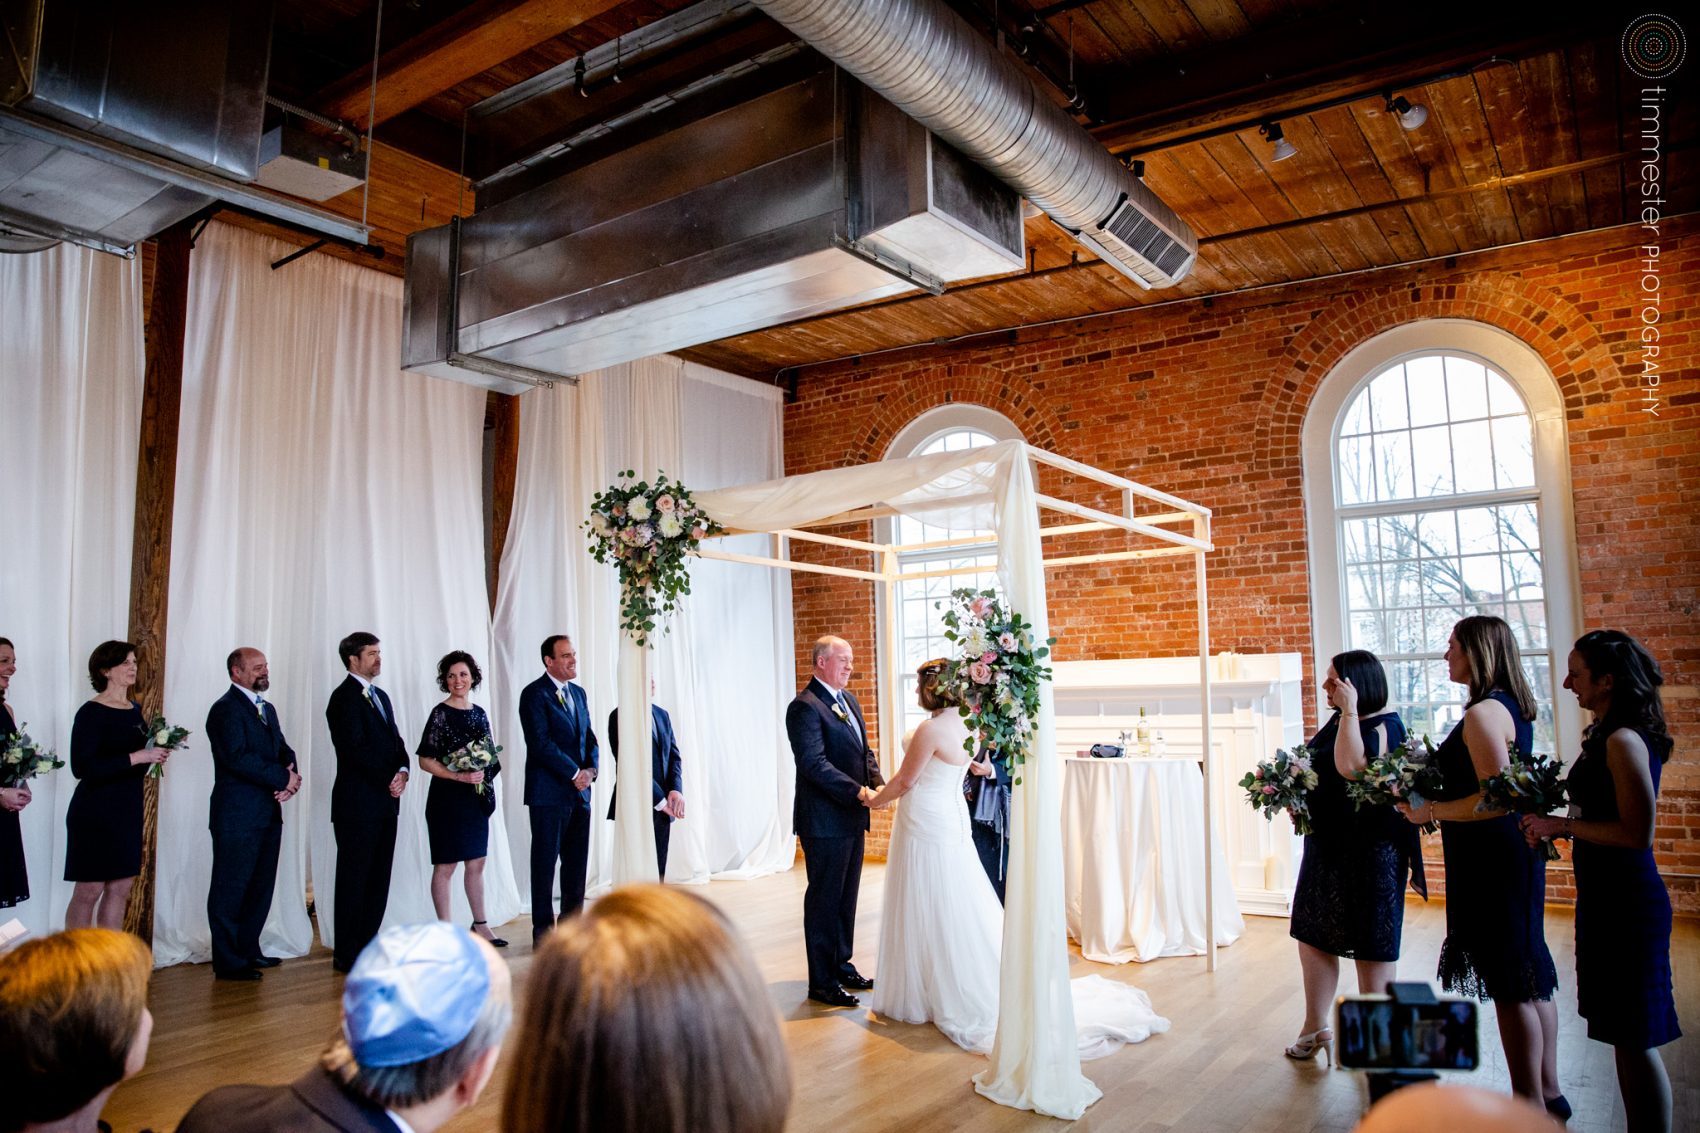 The gorgeous indoor ceremony for Jessica + David's winter wedding at The Cotton Room in NC.